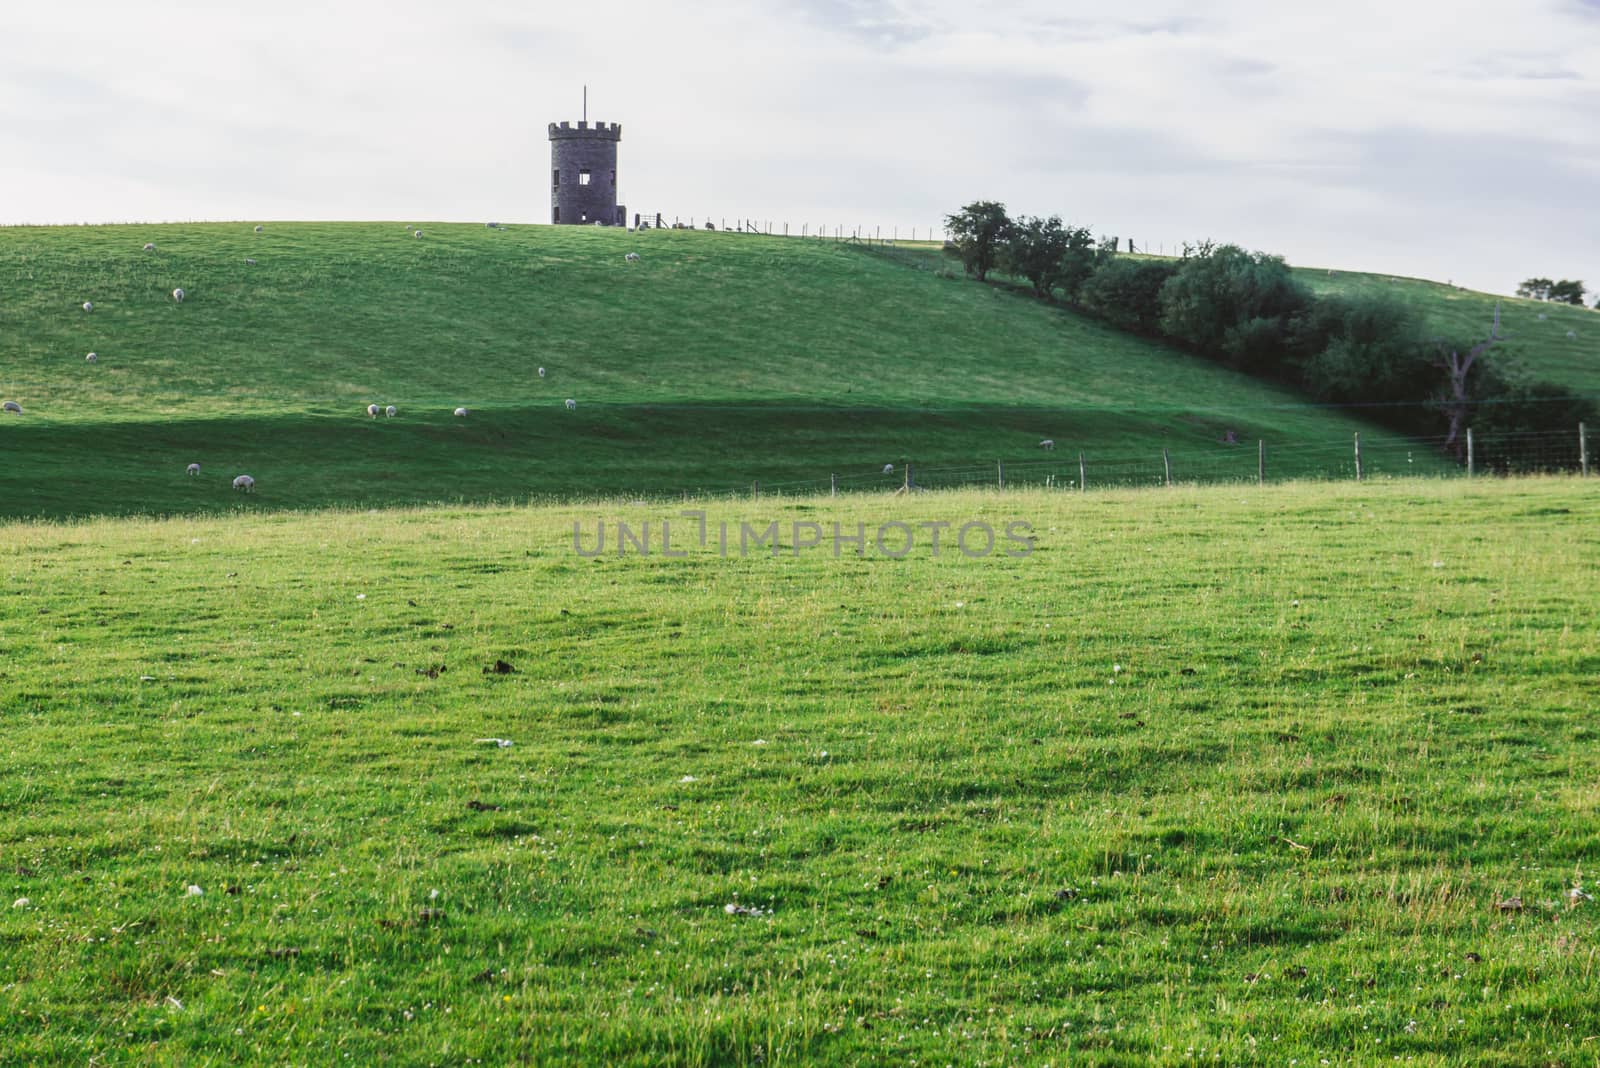 St Anthony Tower Milnthopre with open fields and blue sky